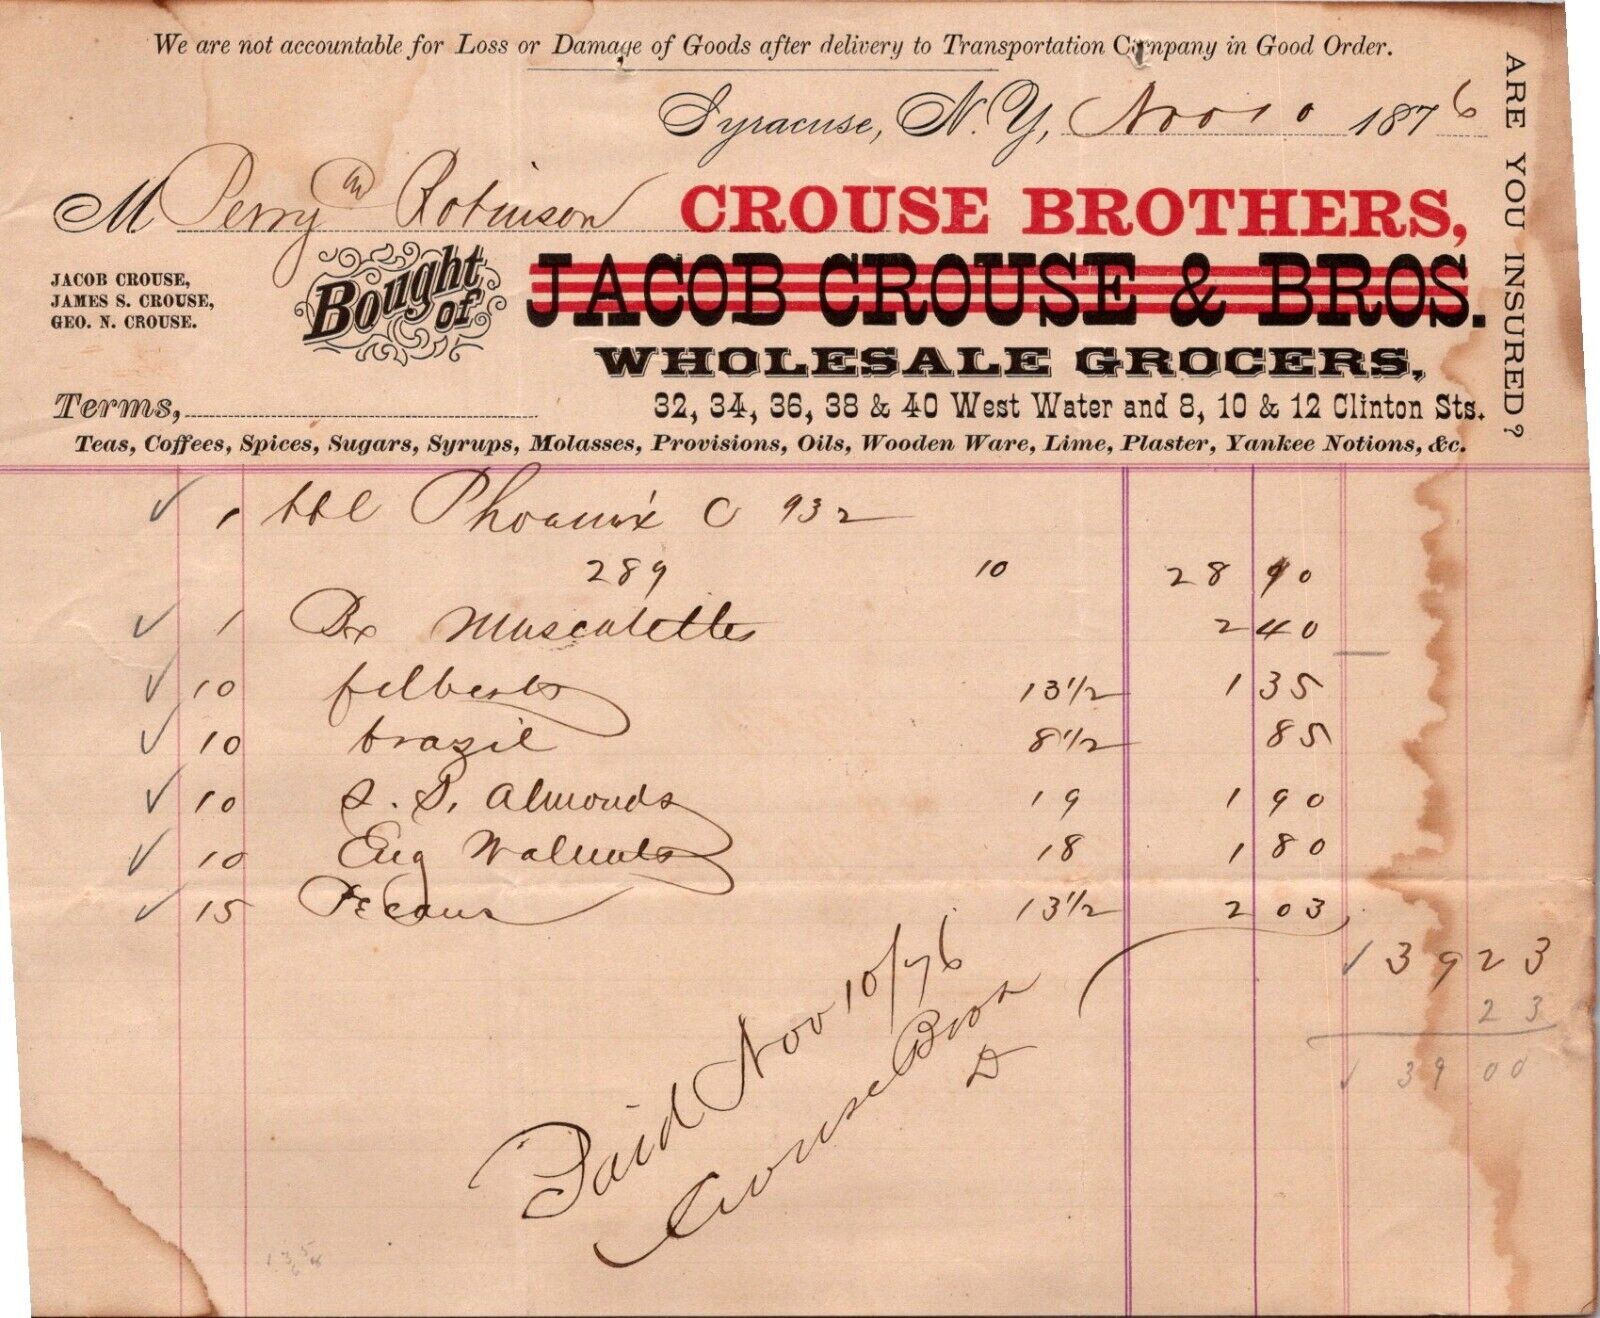 1876 CROUSE BROTHERS WHOLESALE GROCERS WATER ST CLINTON ST SYRACUSE NY AC313